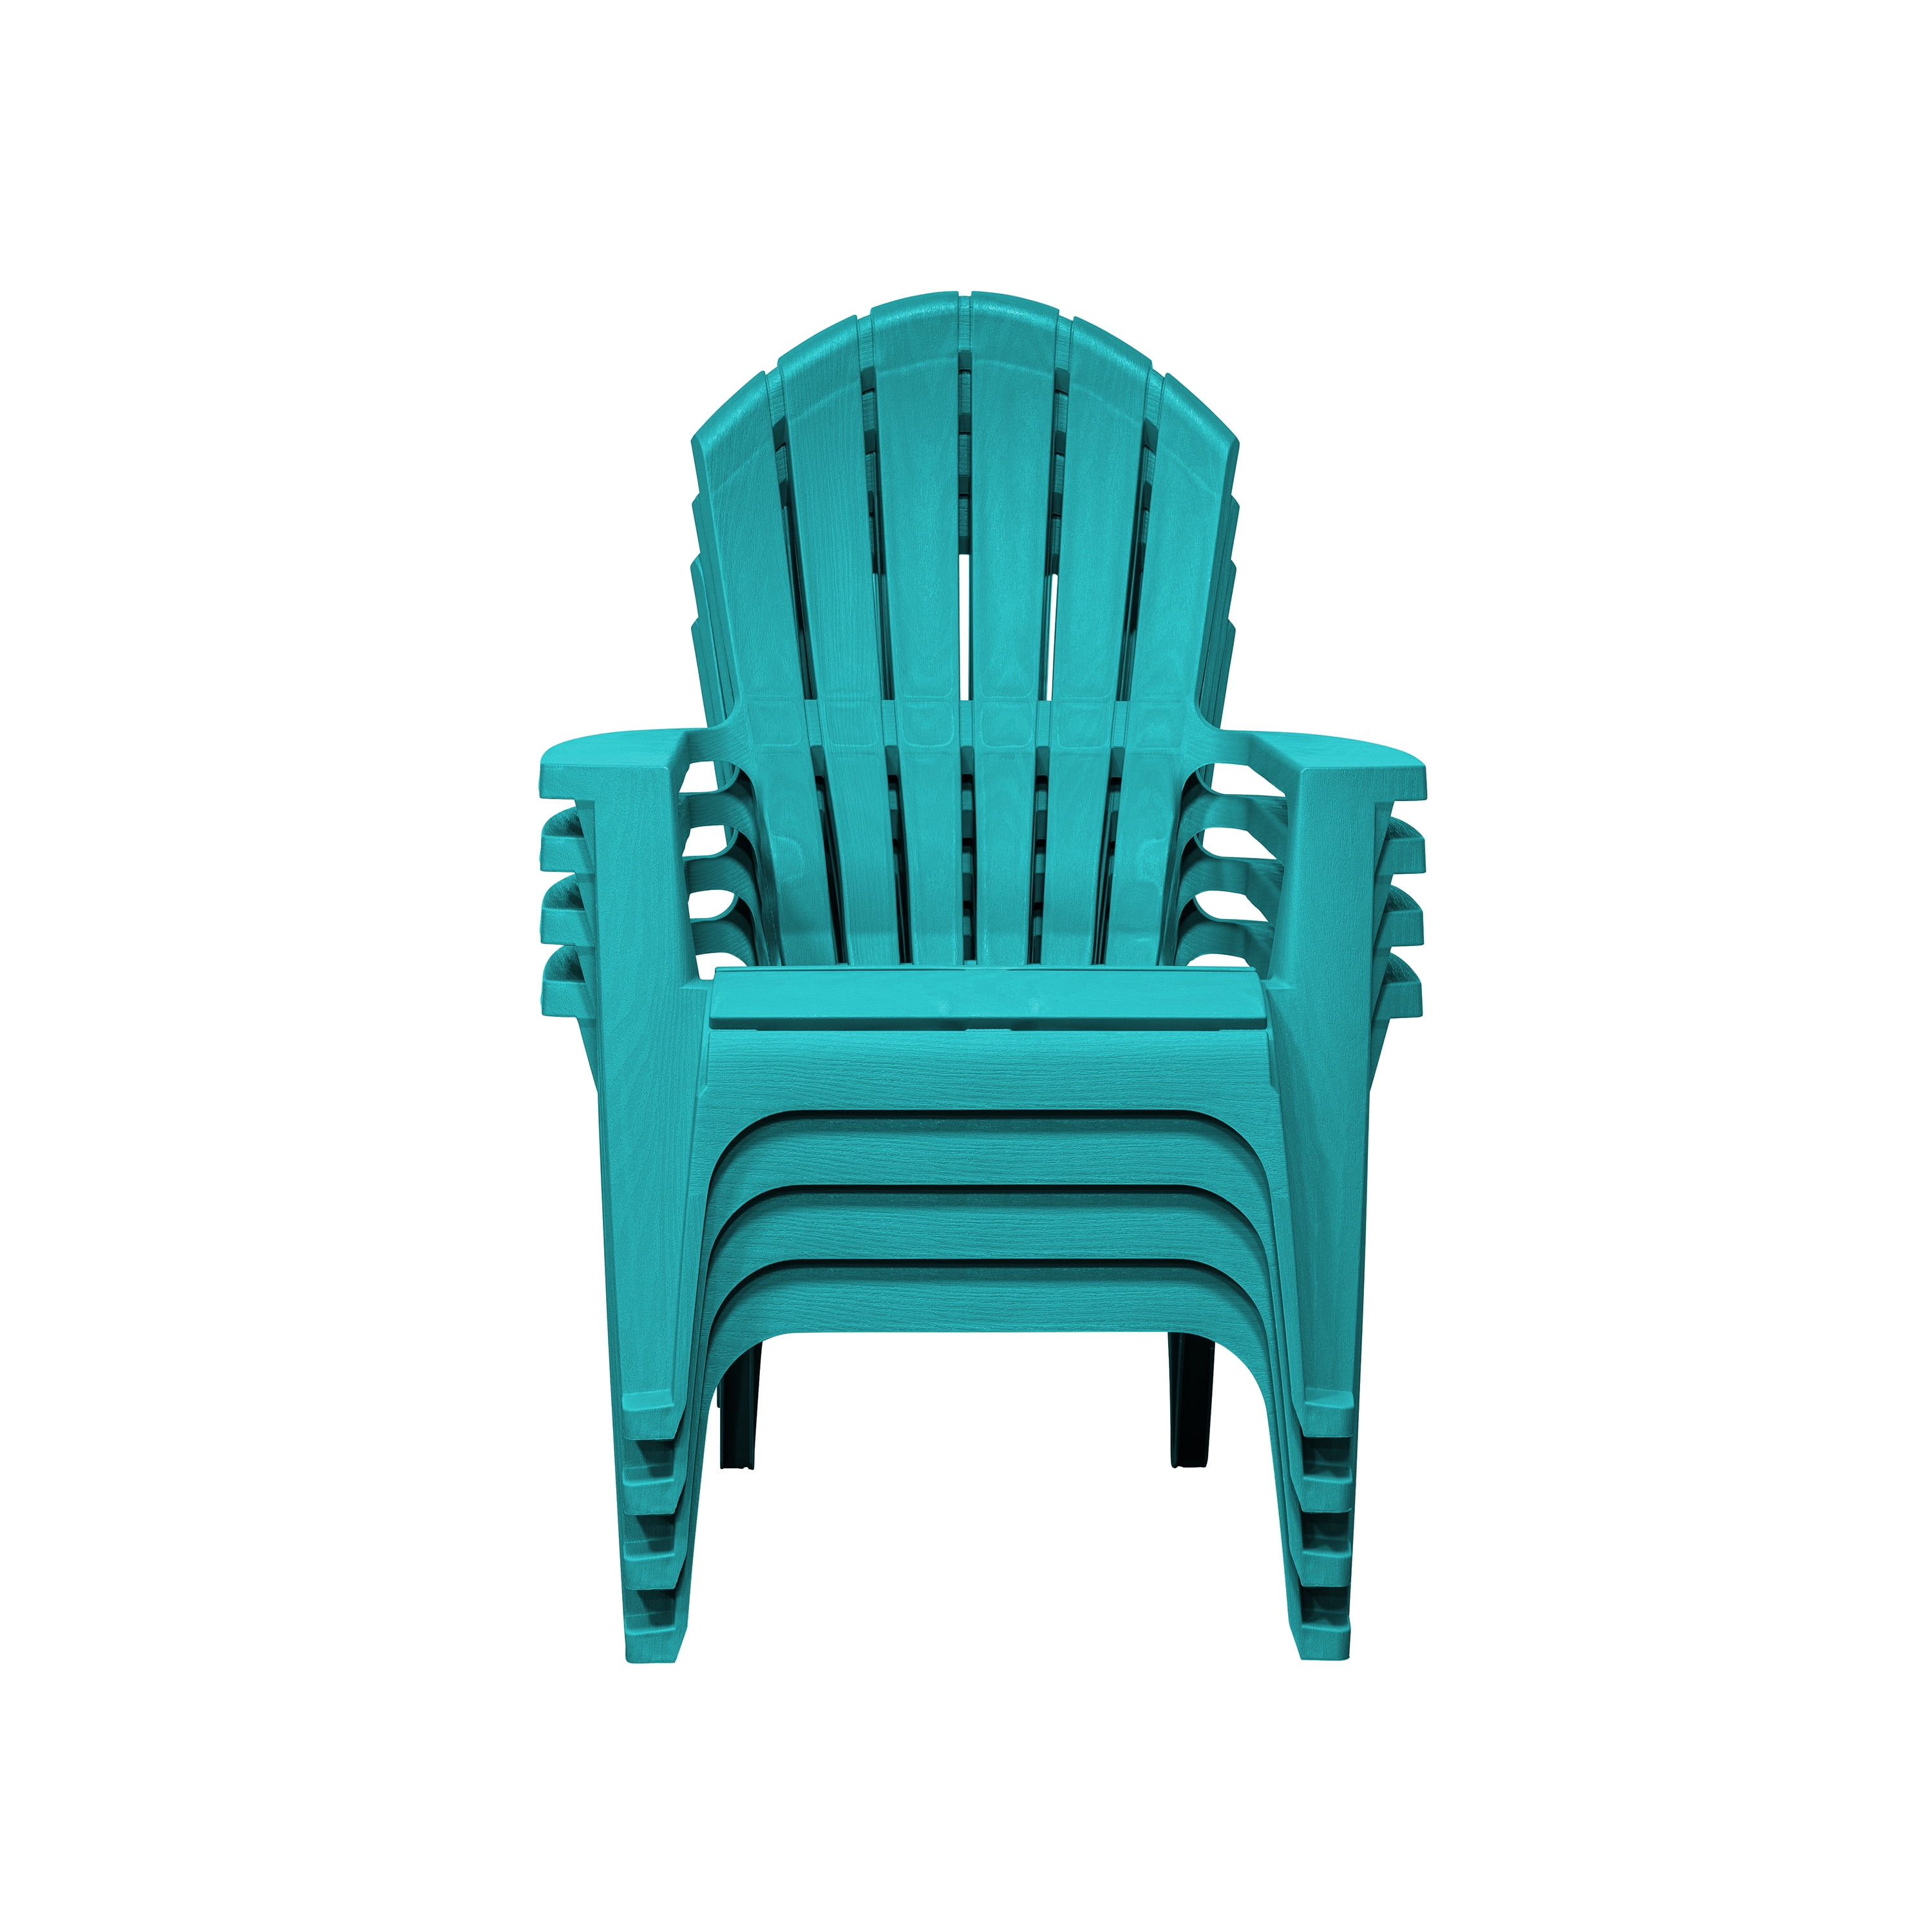 Plastic Adirondack Chairs Stackable, Stackable Plastic Lawn Chairs Menards